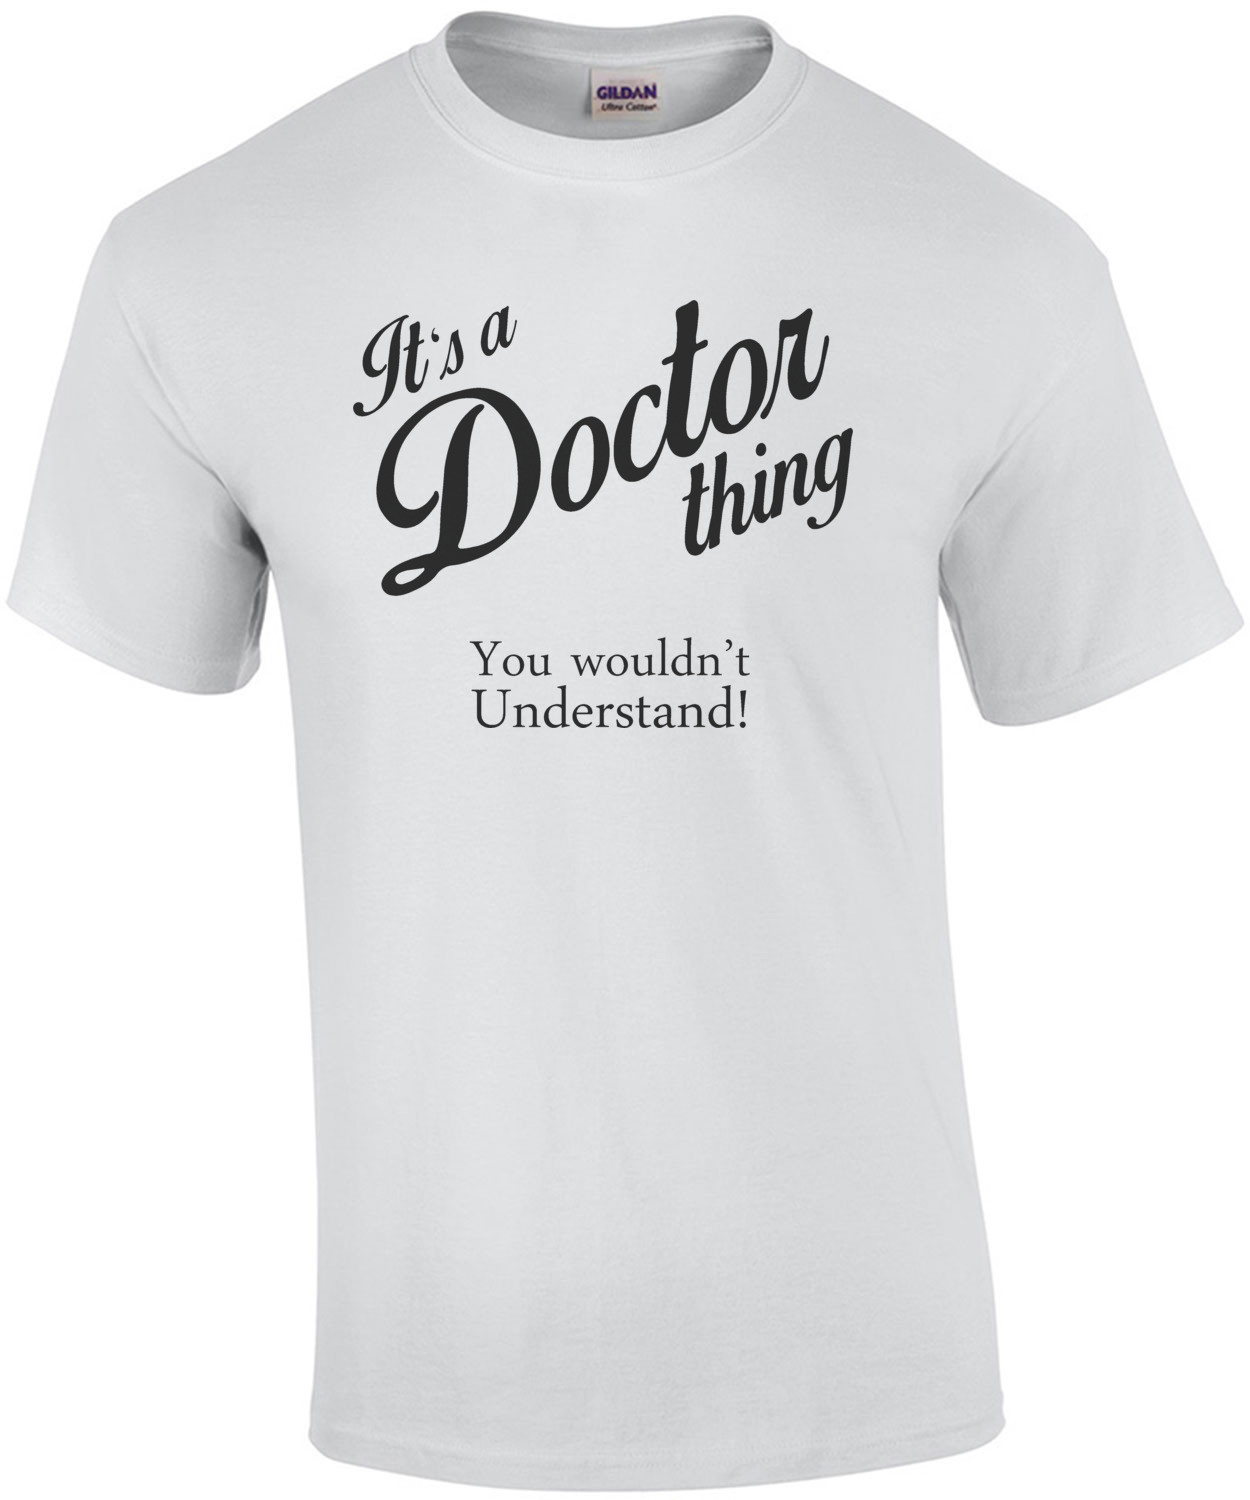 It's a doctor thing. You wouldn't understand! T-Shirt